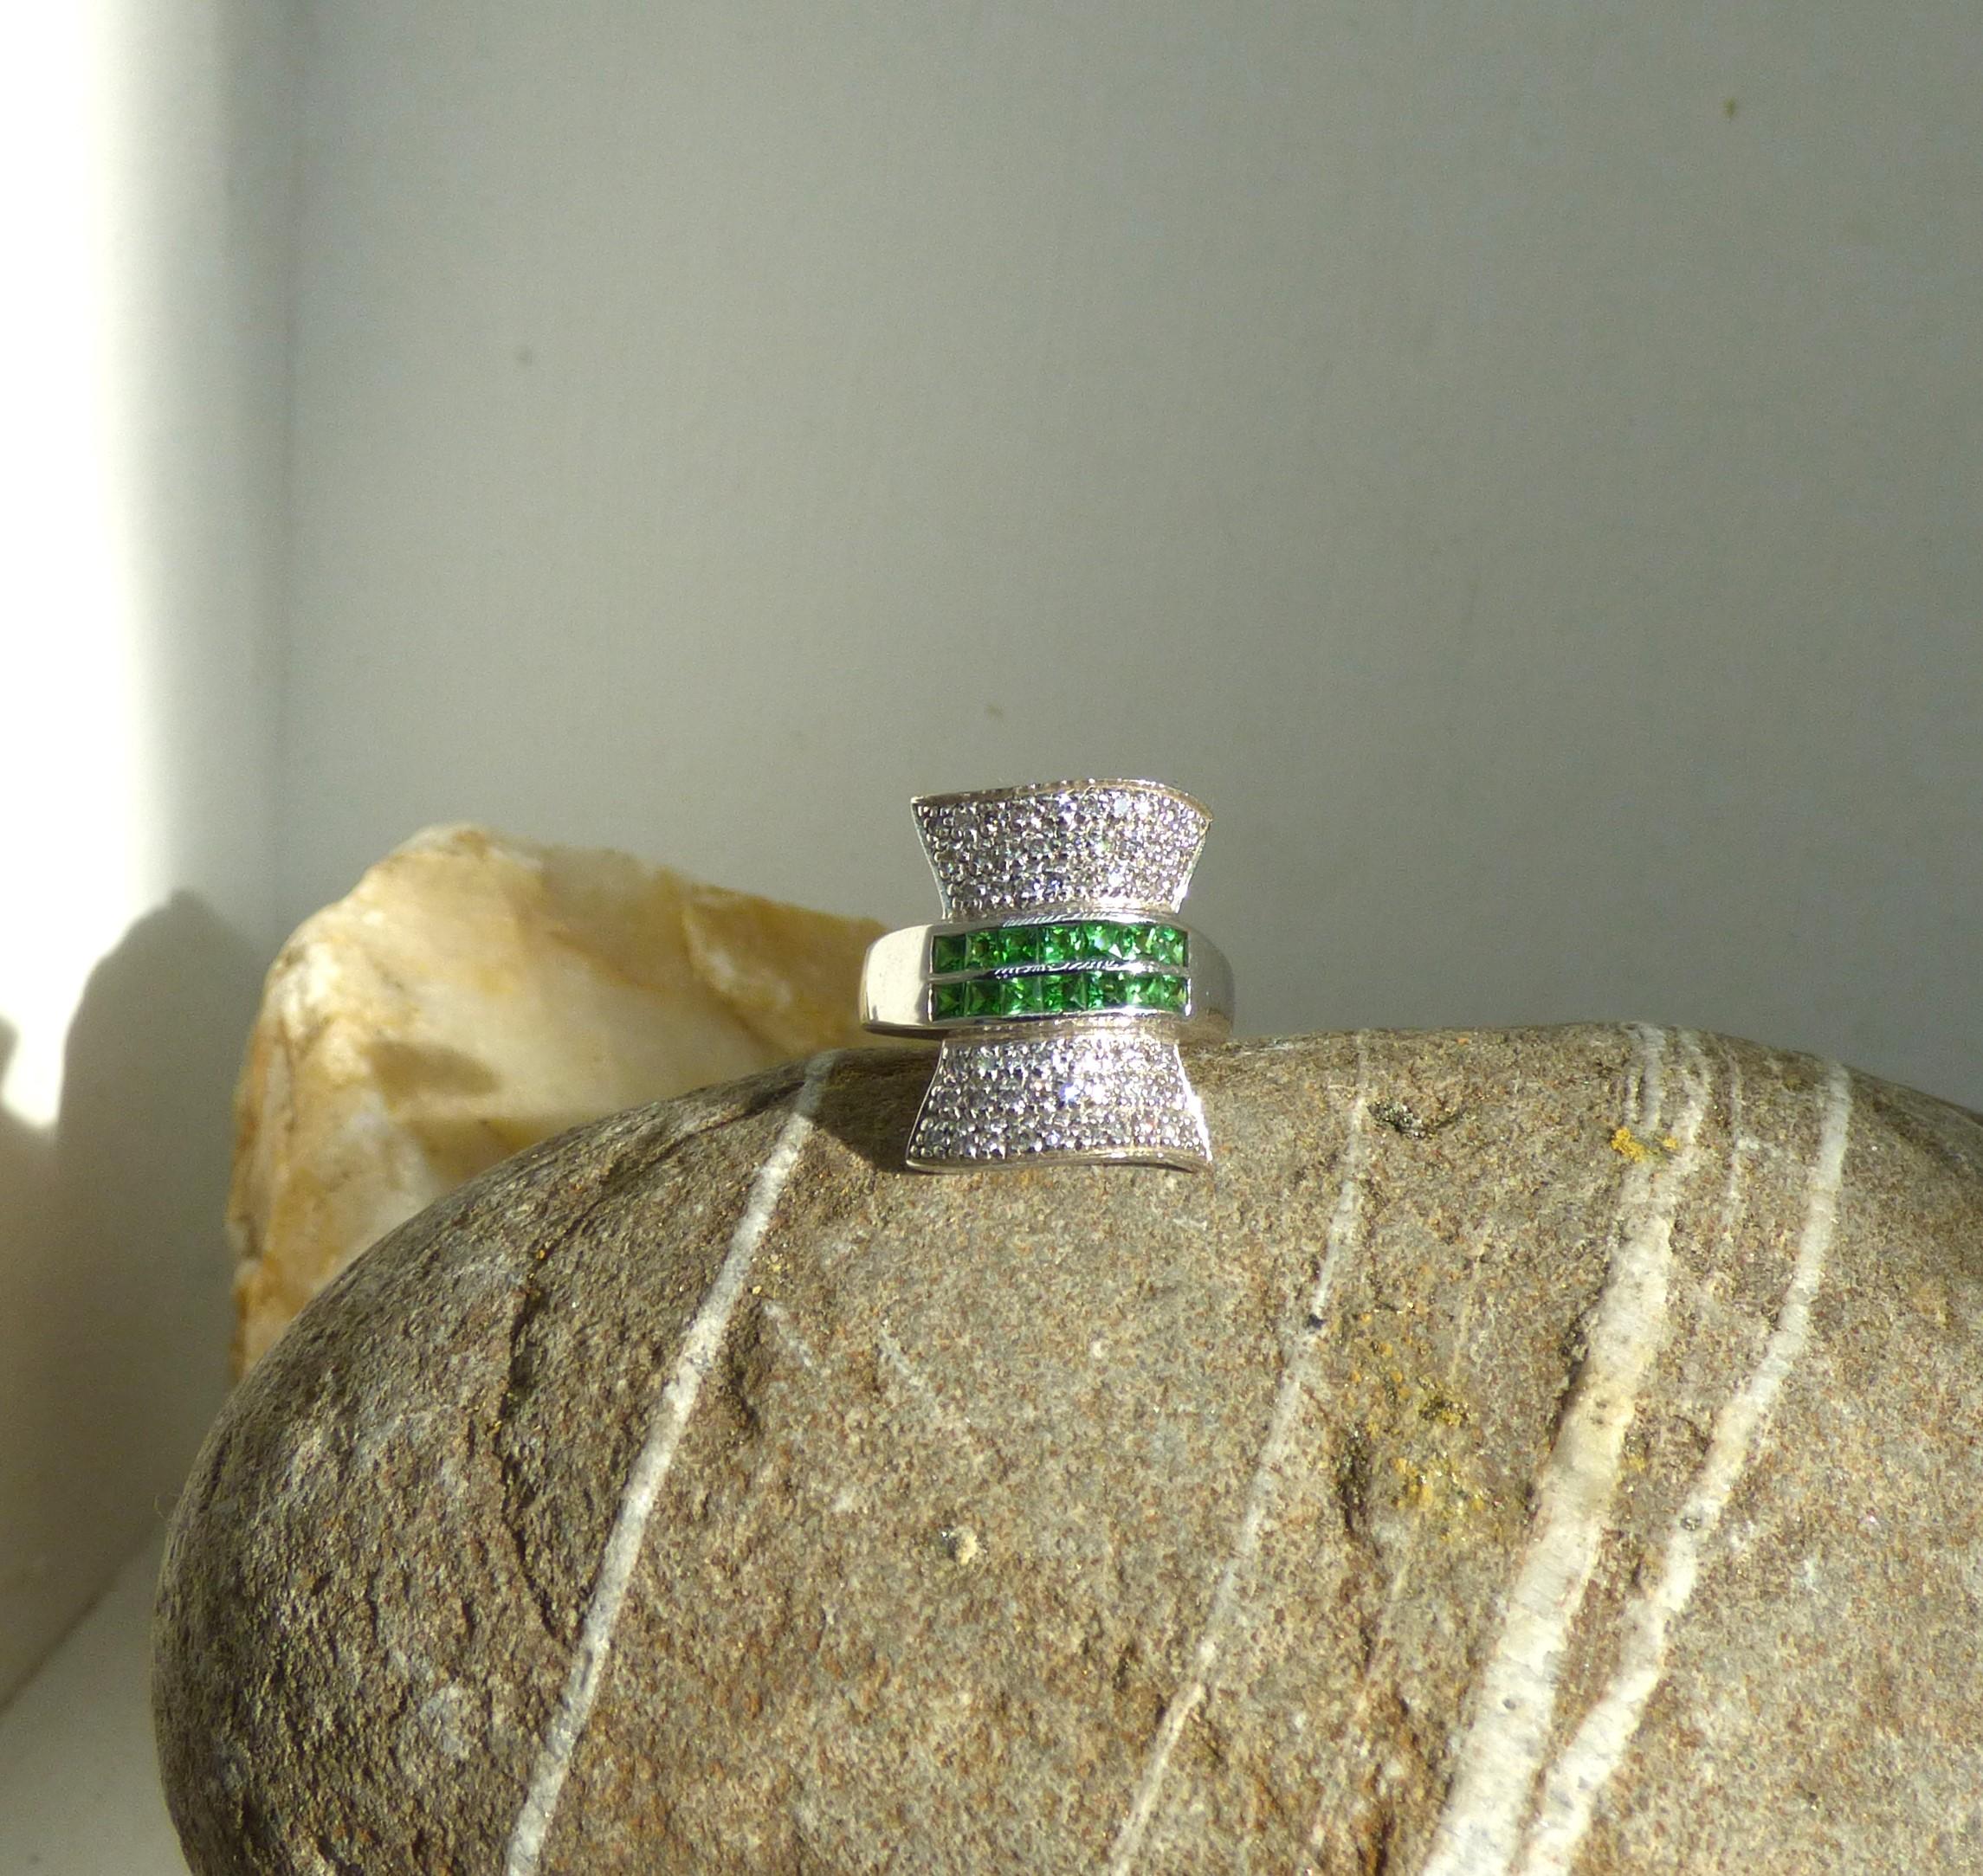 Looking for a ring that fills the finger?  Look no further! As seen in the photos, this ring would stand out on any finger.  The total front of the ring is 20X15mm.  It is set with two rows of square cut Tsavorite Garnets. The rest of the ring is